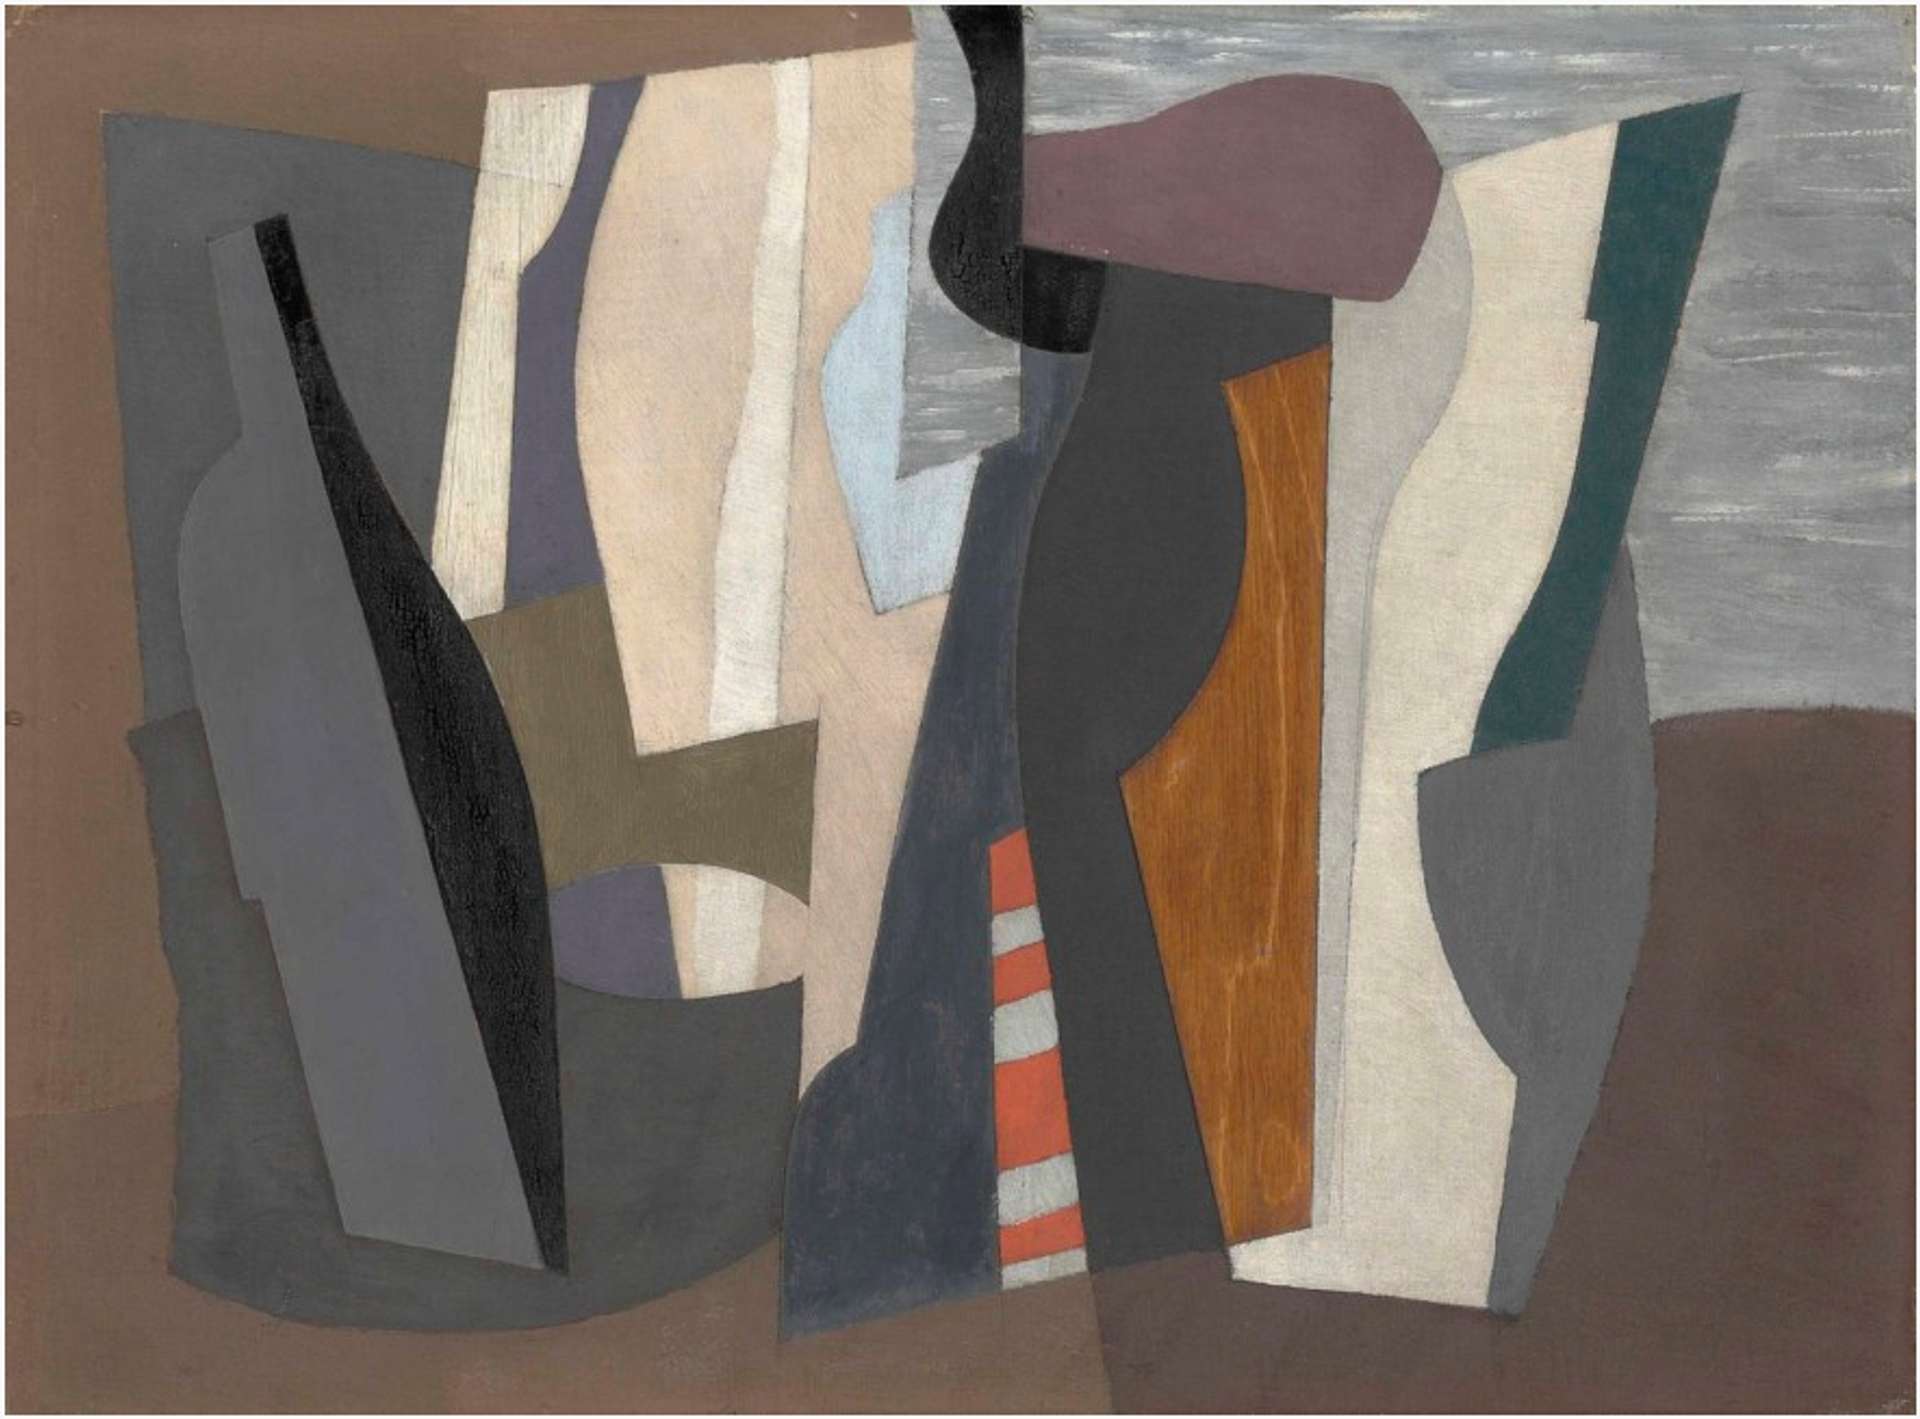 An abstract artwork with vertical, semi-curved delineations in various hues, forming a focal point in the center. The perimeter is predominantly painted brown, with a grey area on the panel left unpainted, creating the illusion of land and sea.